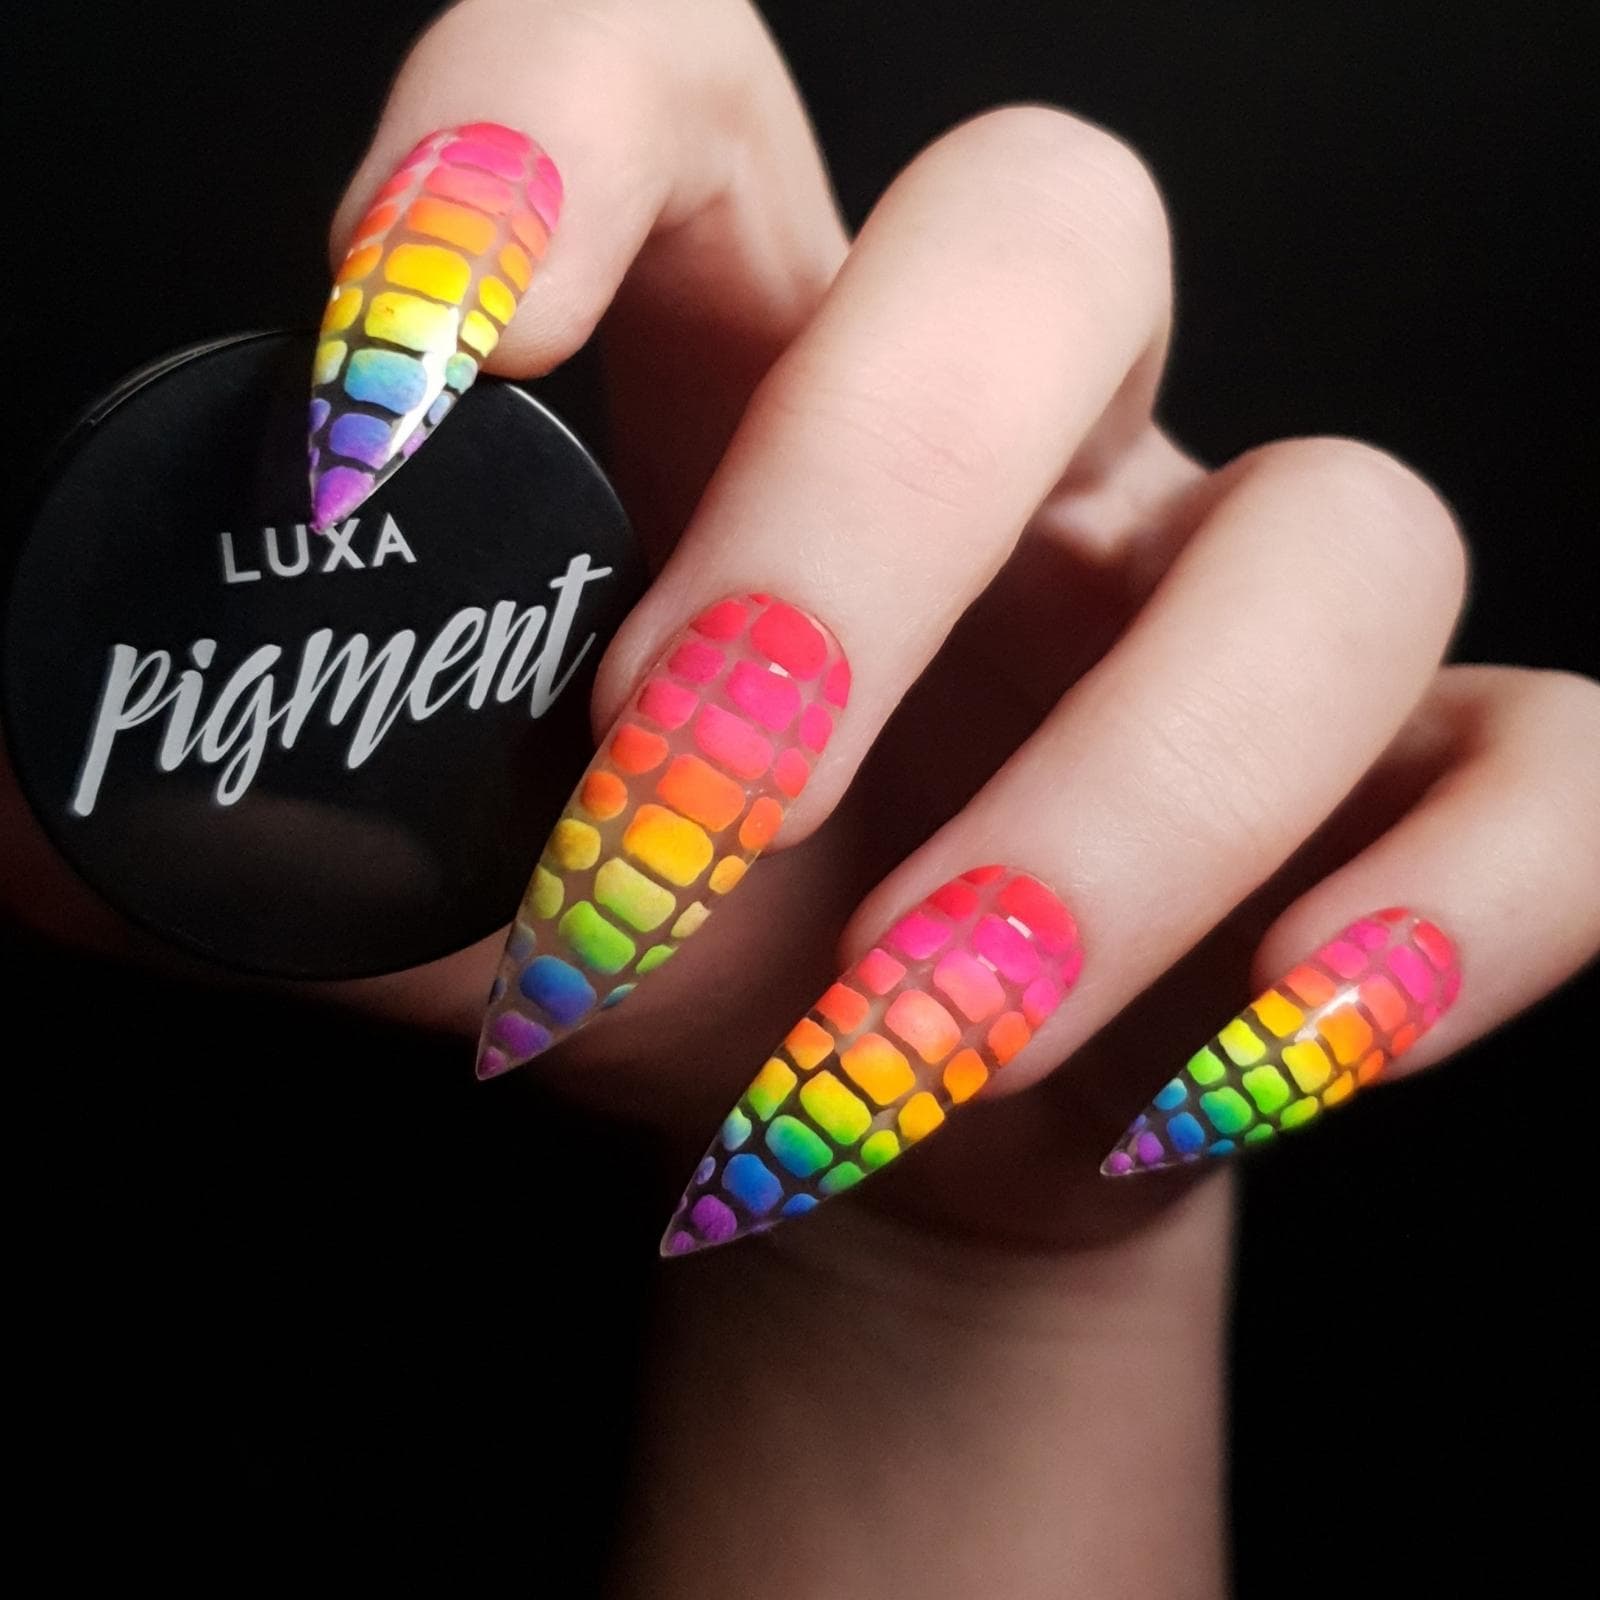 Luxapolish Chronicles Neon Pigment - Maui Wowie